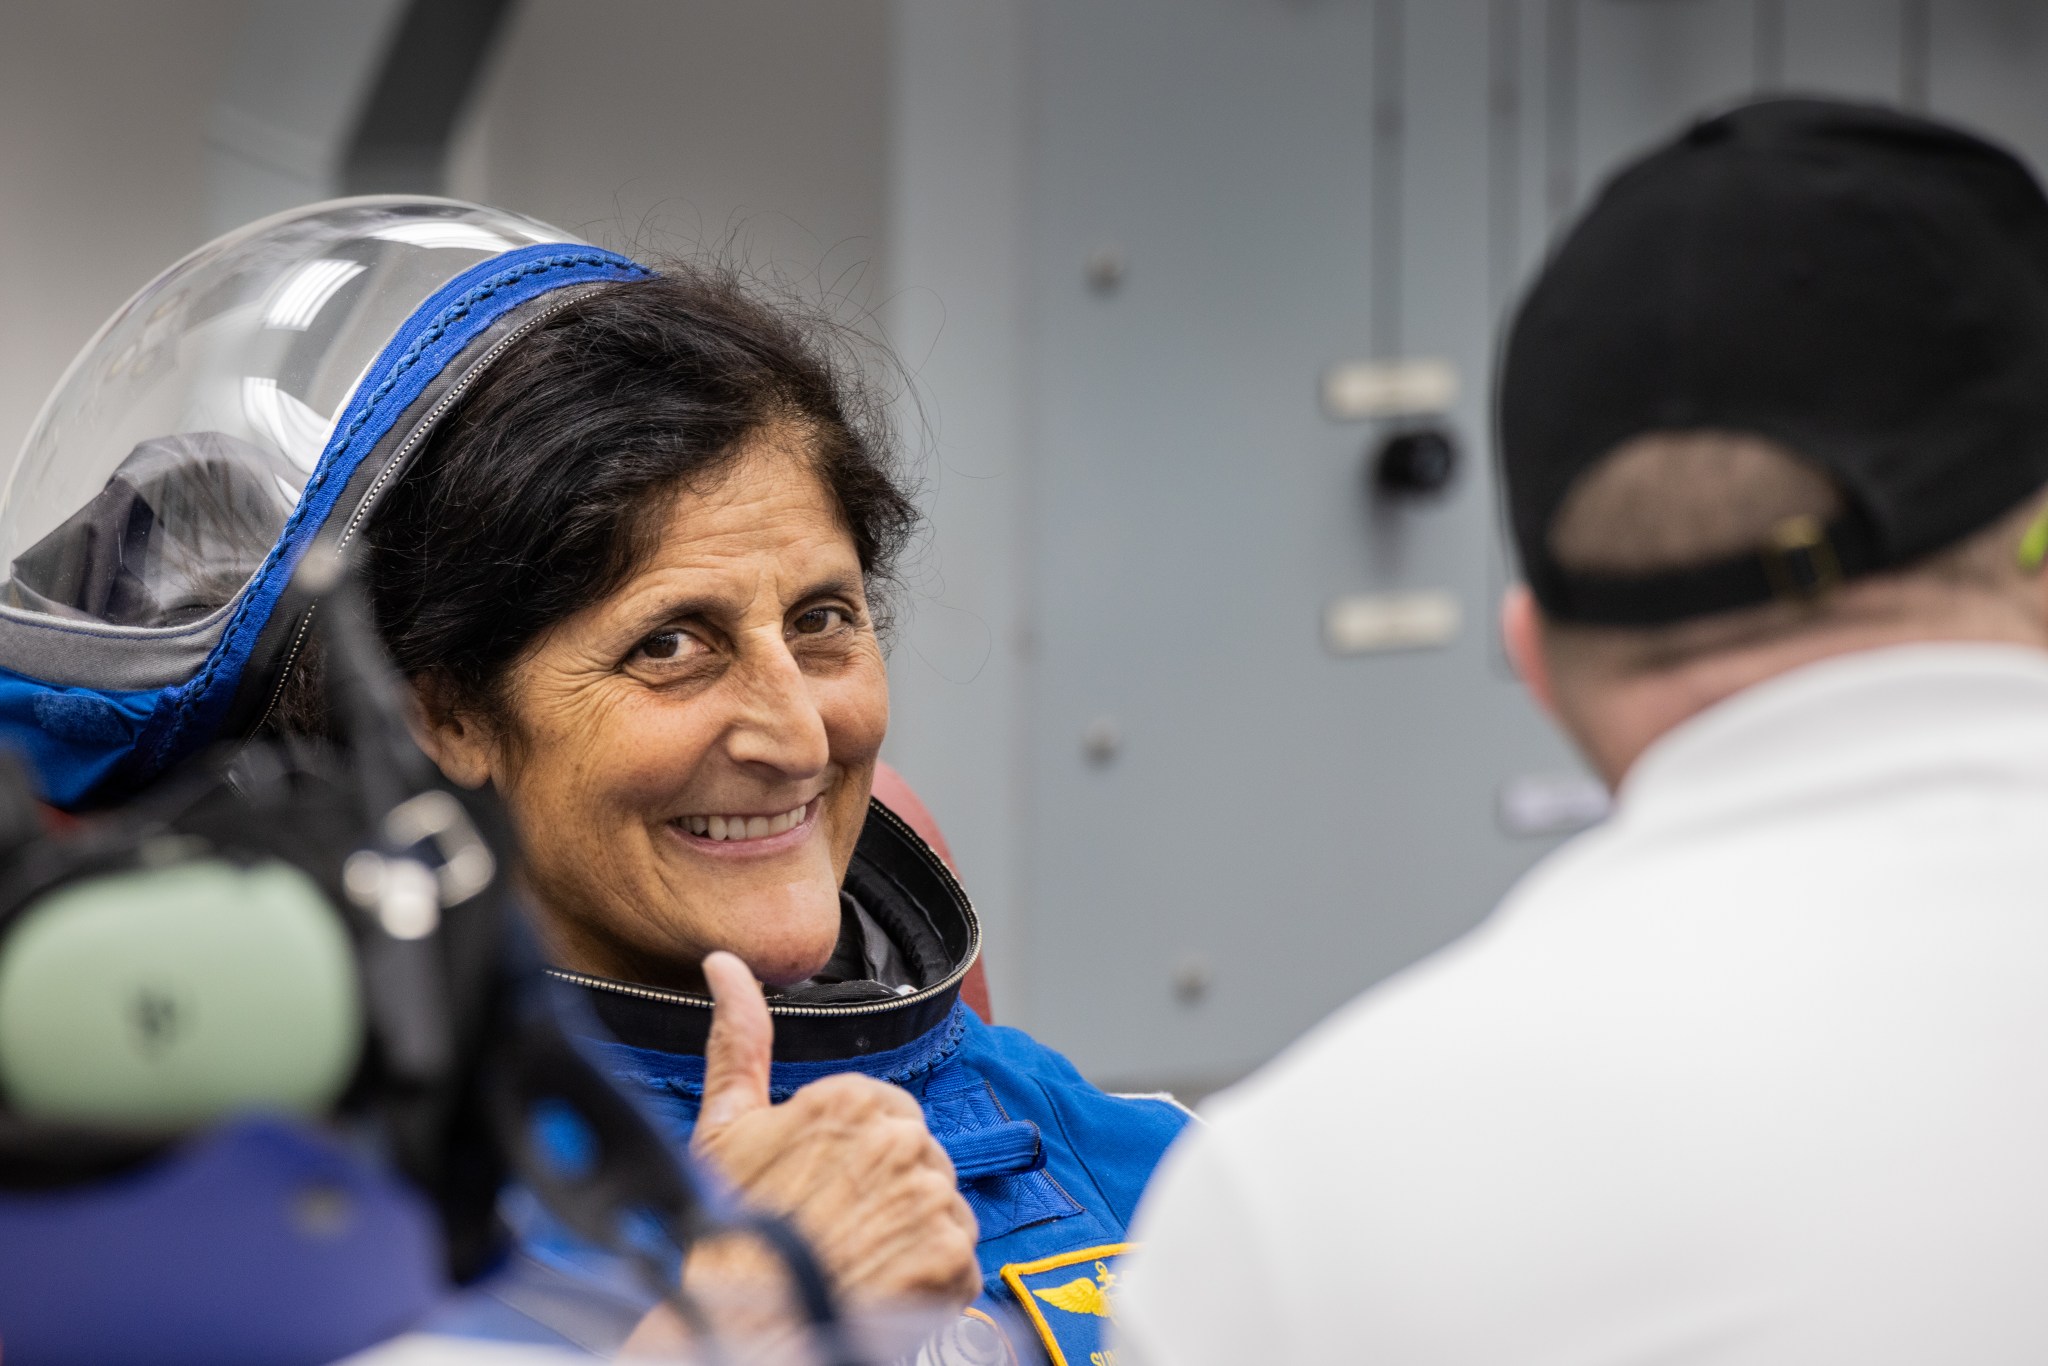 Astronaut Suni Williams (left), an Indian-American woman, smiles and gives a thumbs up to the camera. She wears a blue Boeing spacesuit.